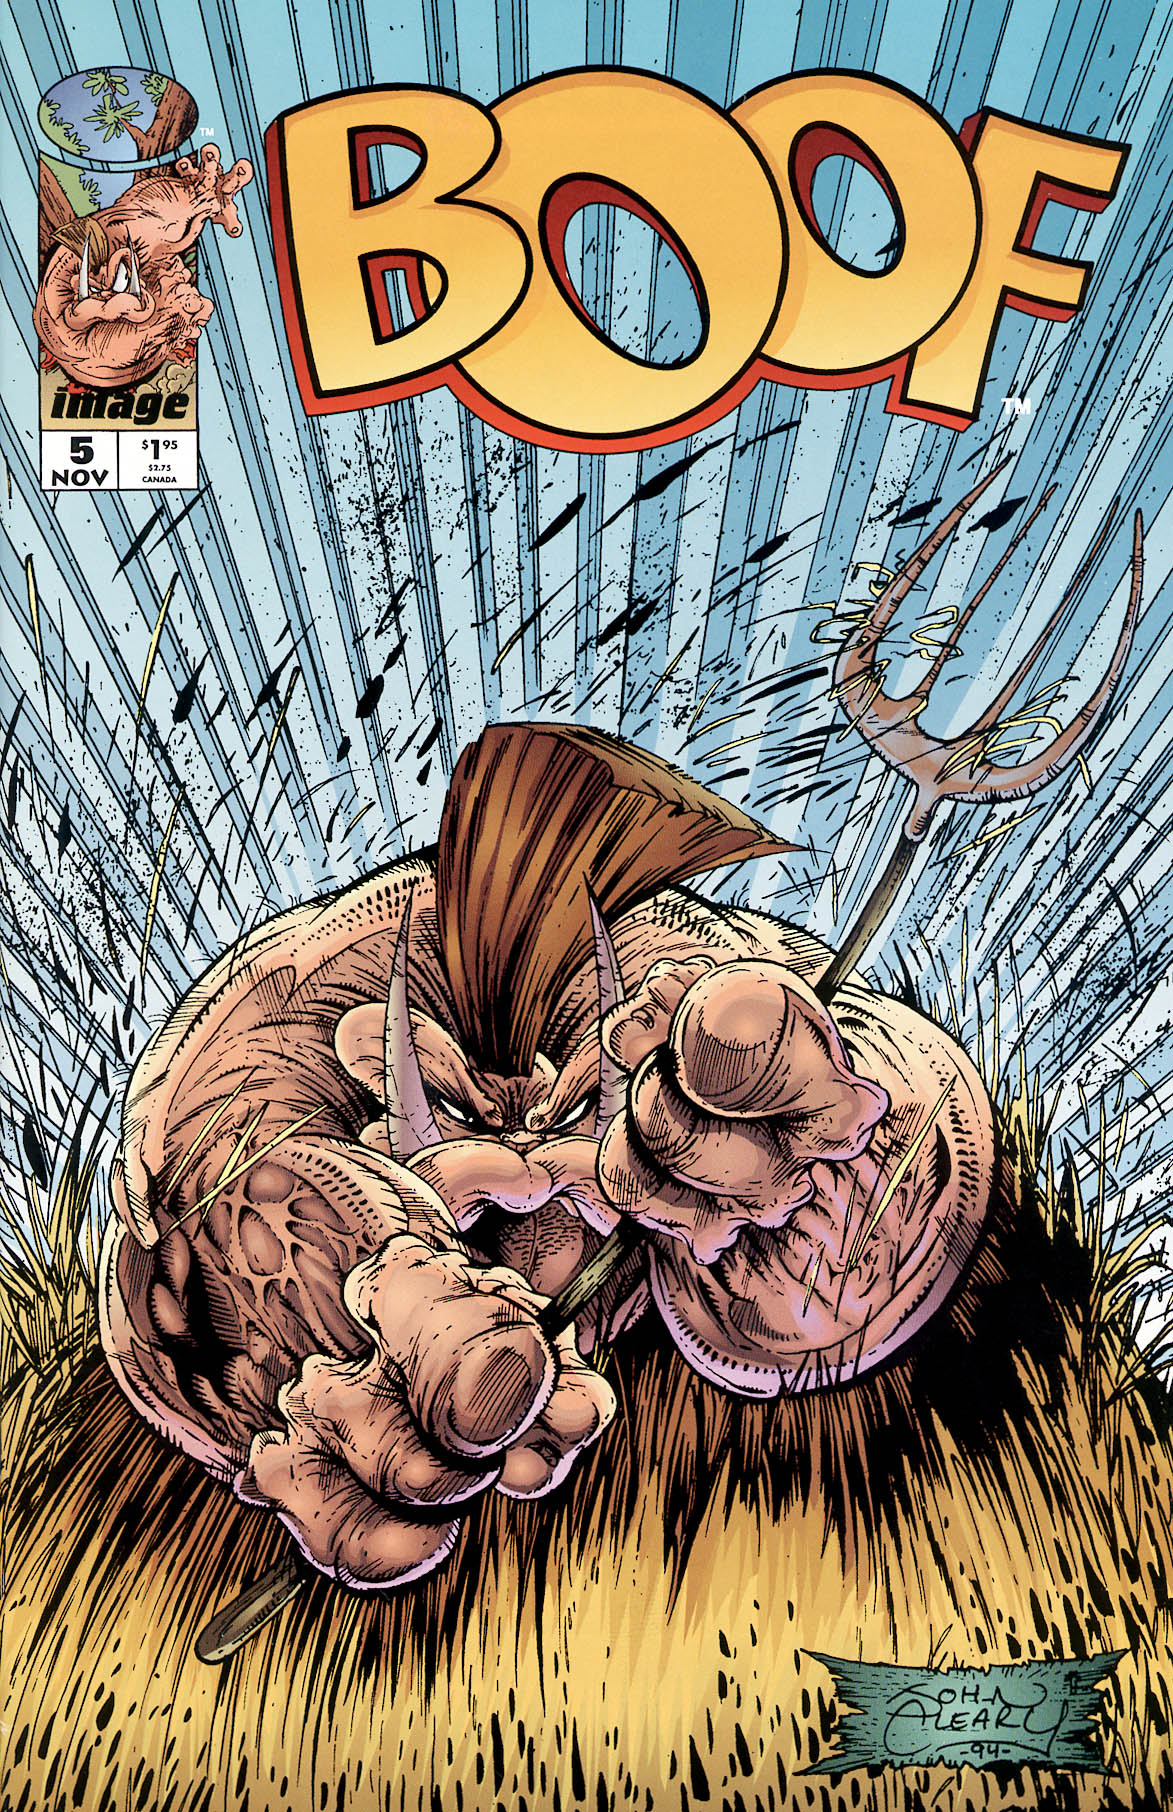 Read online Boof comic -  Issue #5 - 2